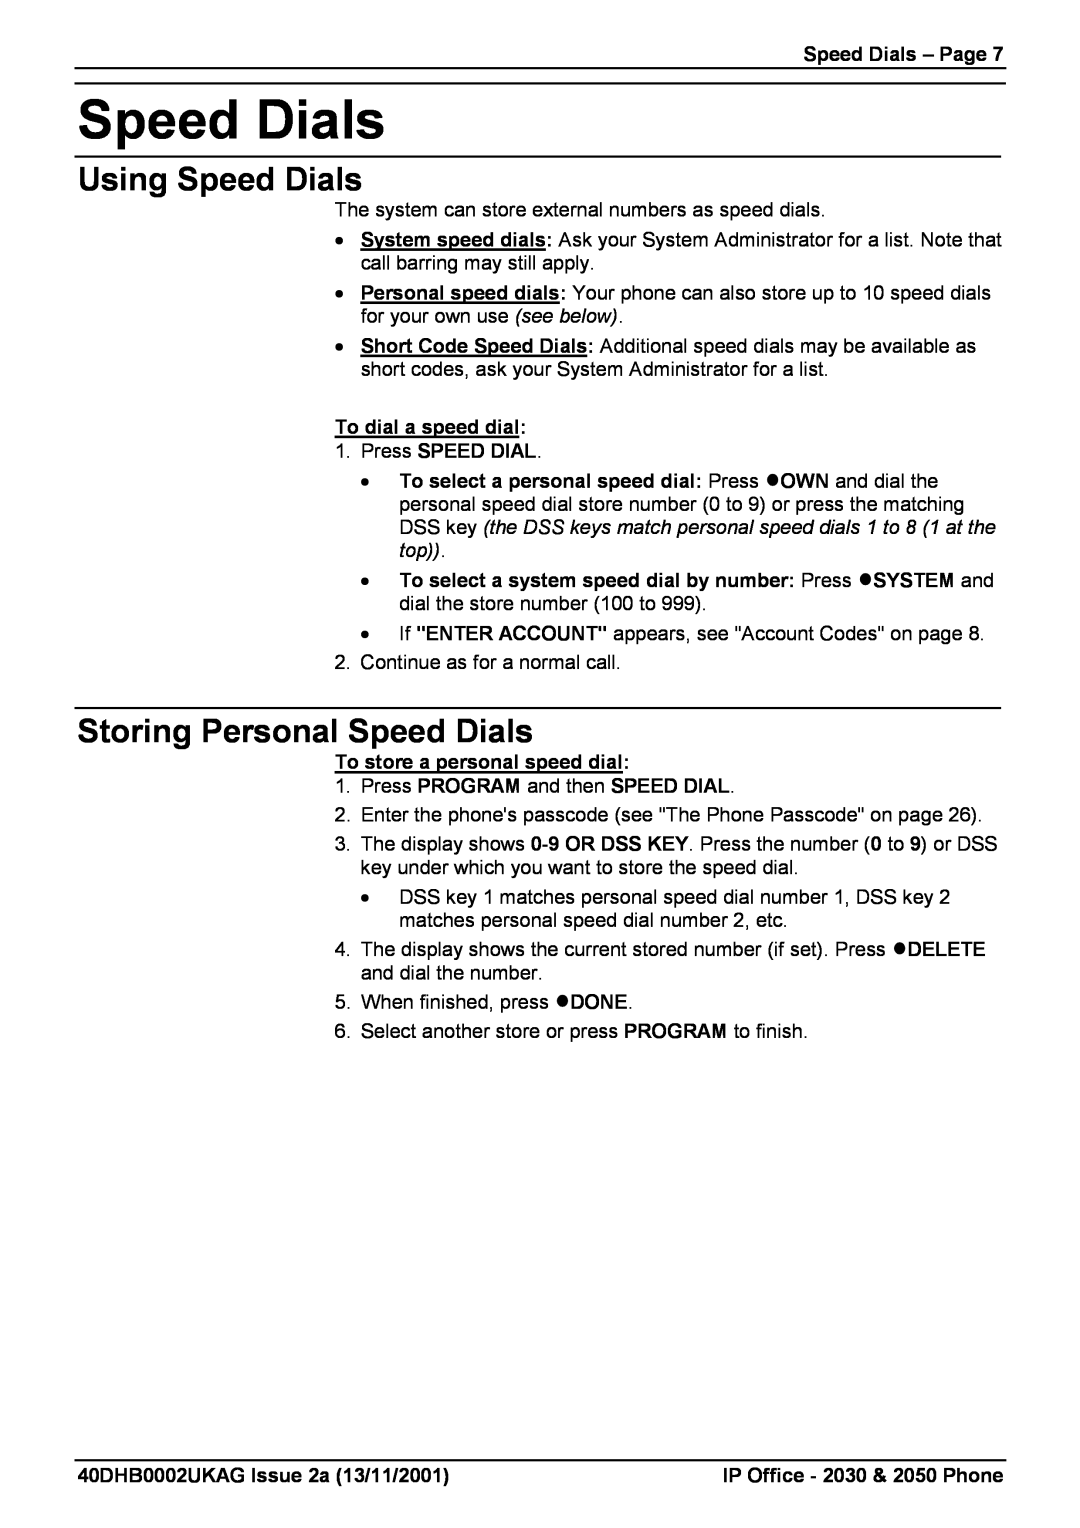 Avaya 2030 Using Speed Dials, Storing Personal Speed Dials, Speed Dials - Page, 40DHB0002UKAG Issue 2a 13/11/2001 